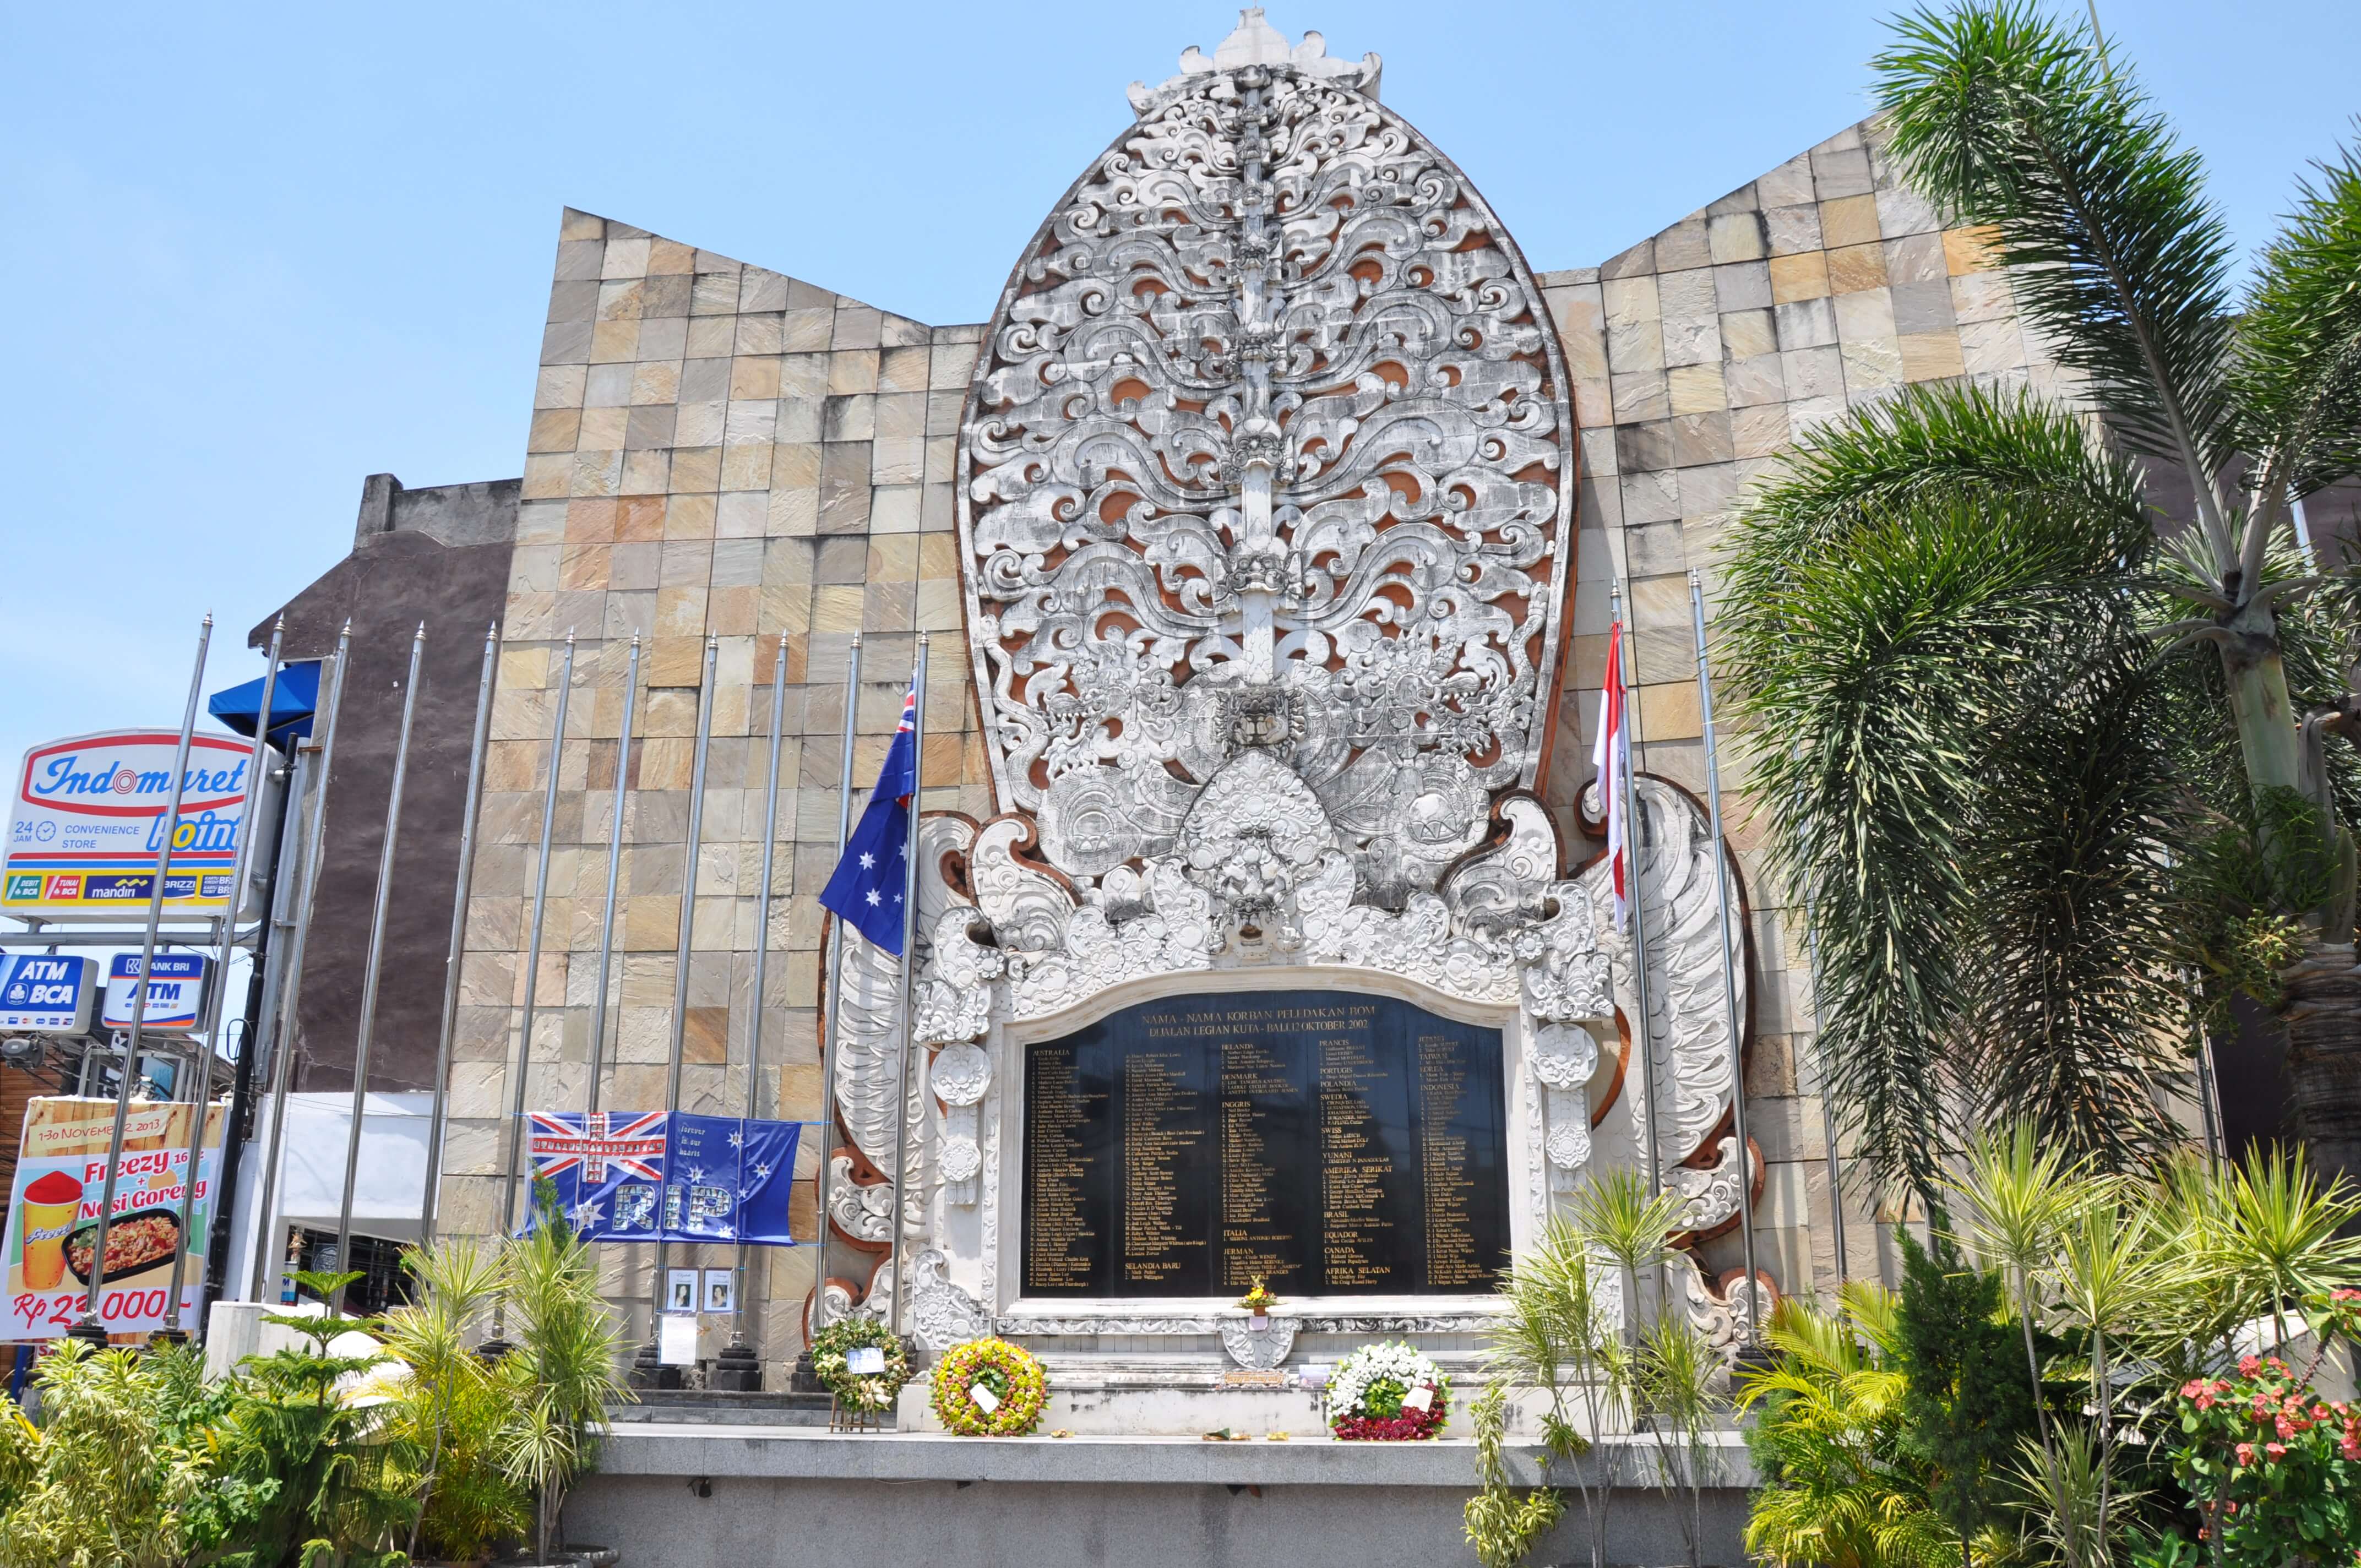 A memorial to commemorate the victims of the Bali bombing in 2002. © Jorge Láscar / Flickr 